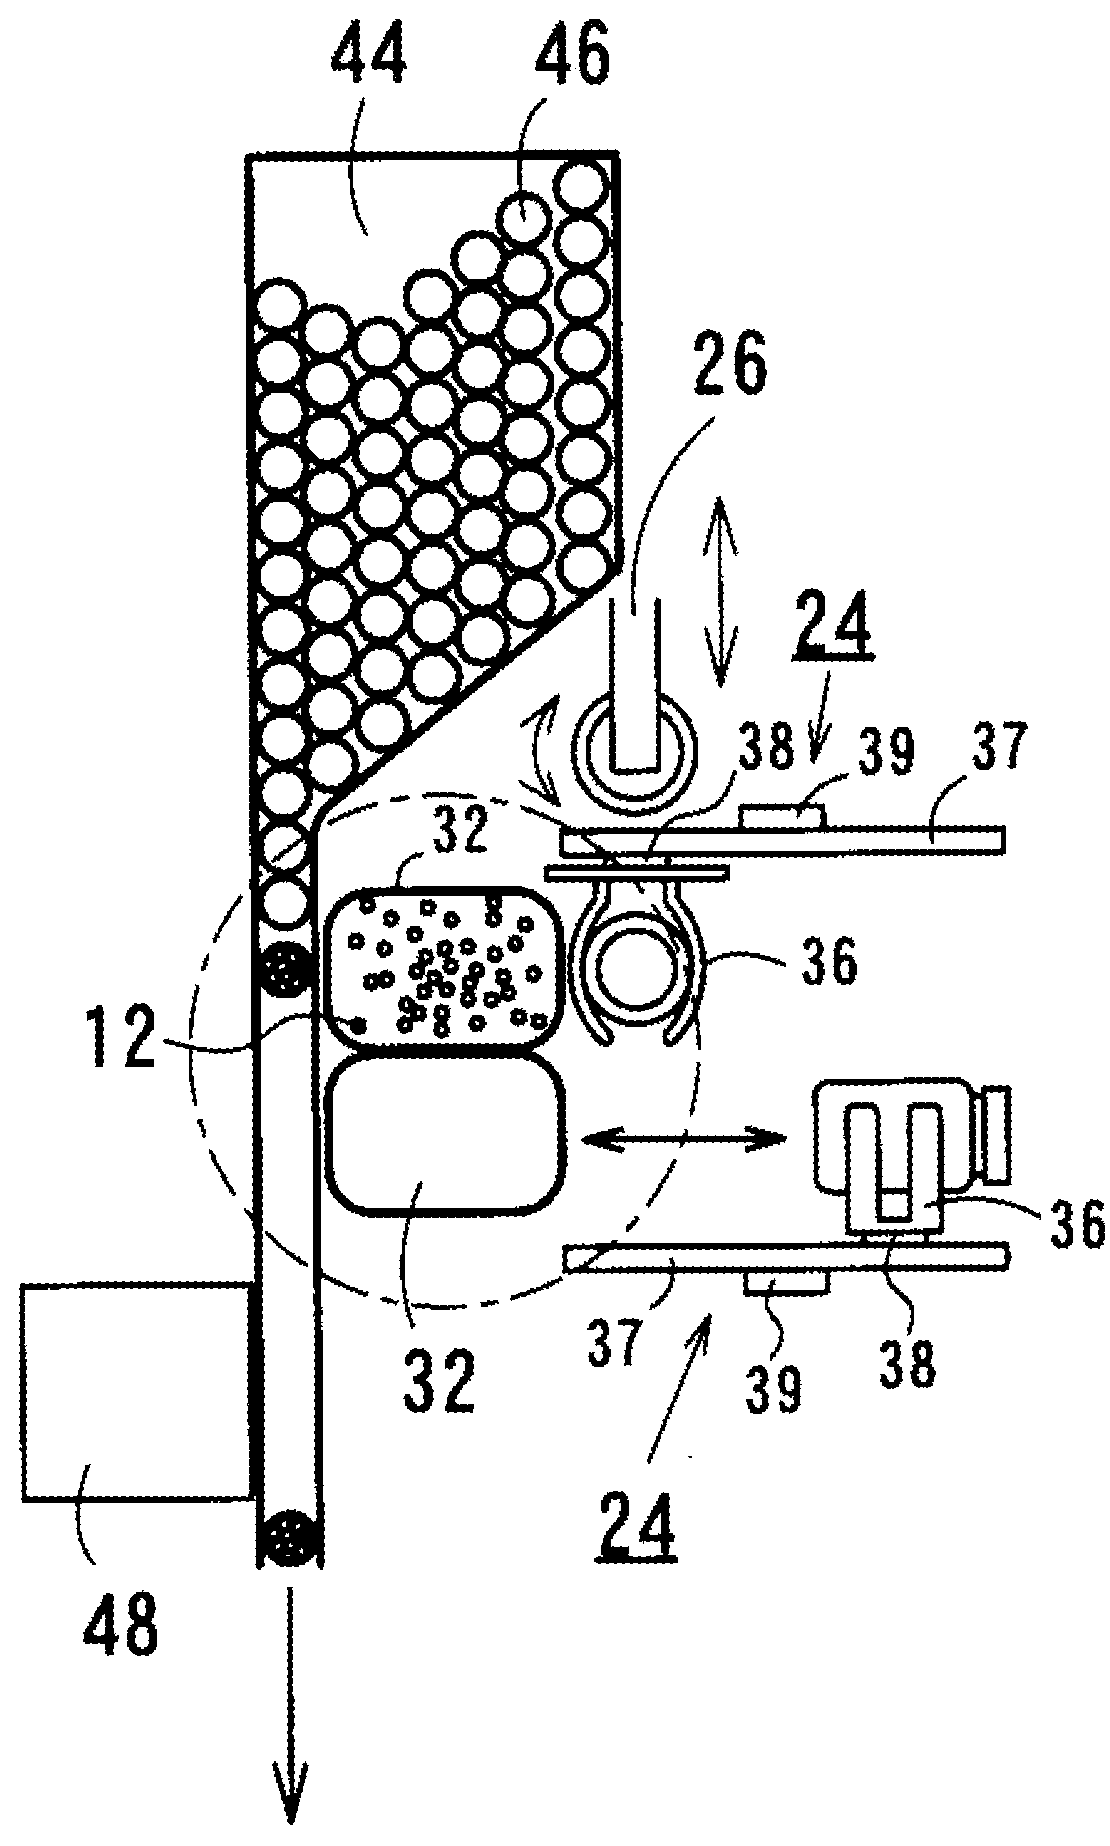 Automatic drug dispensing and picking system